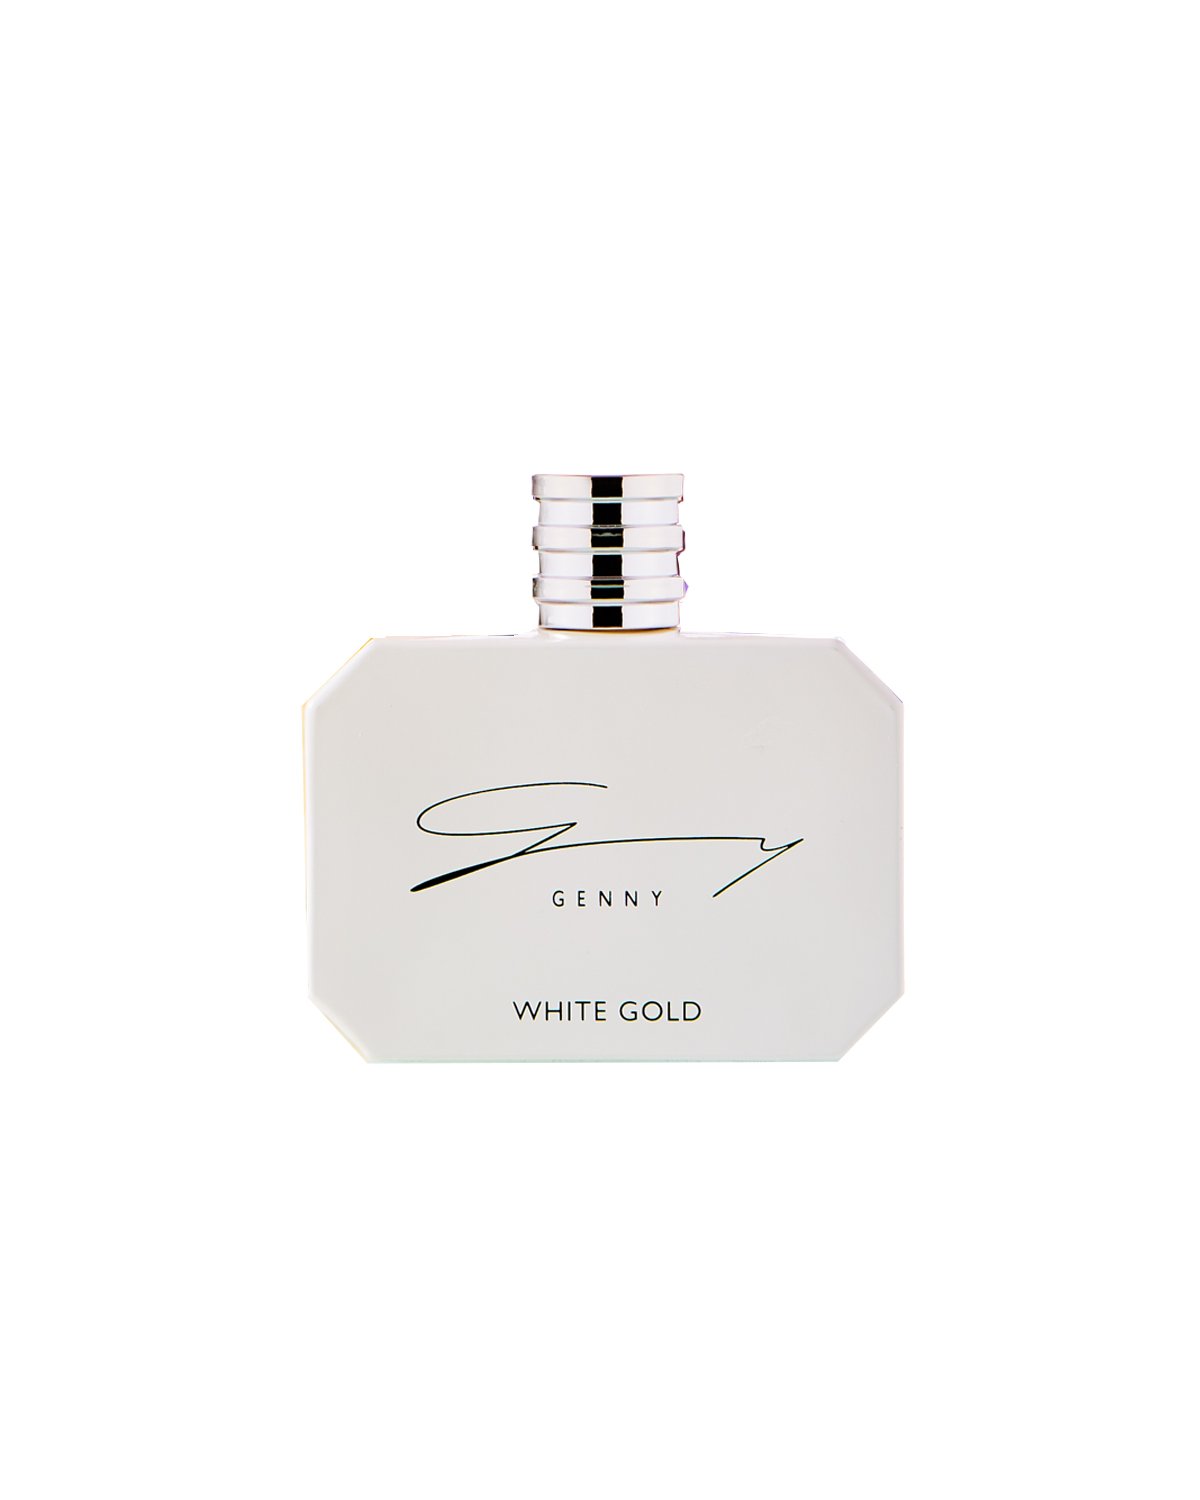 Perfume white gold by Genny